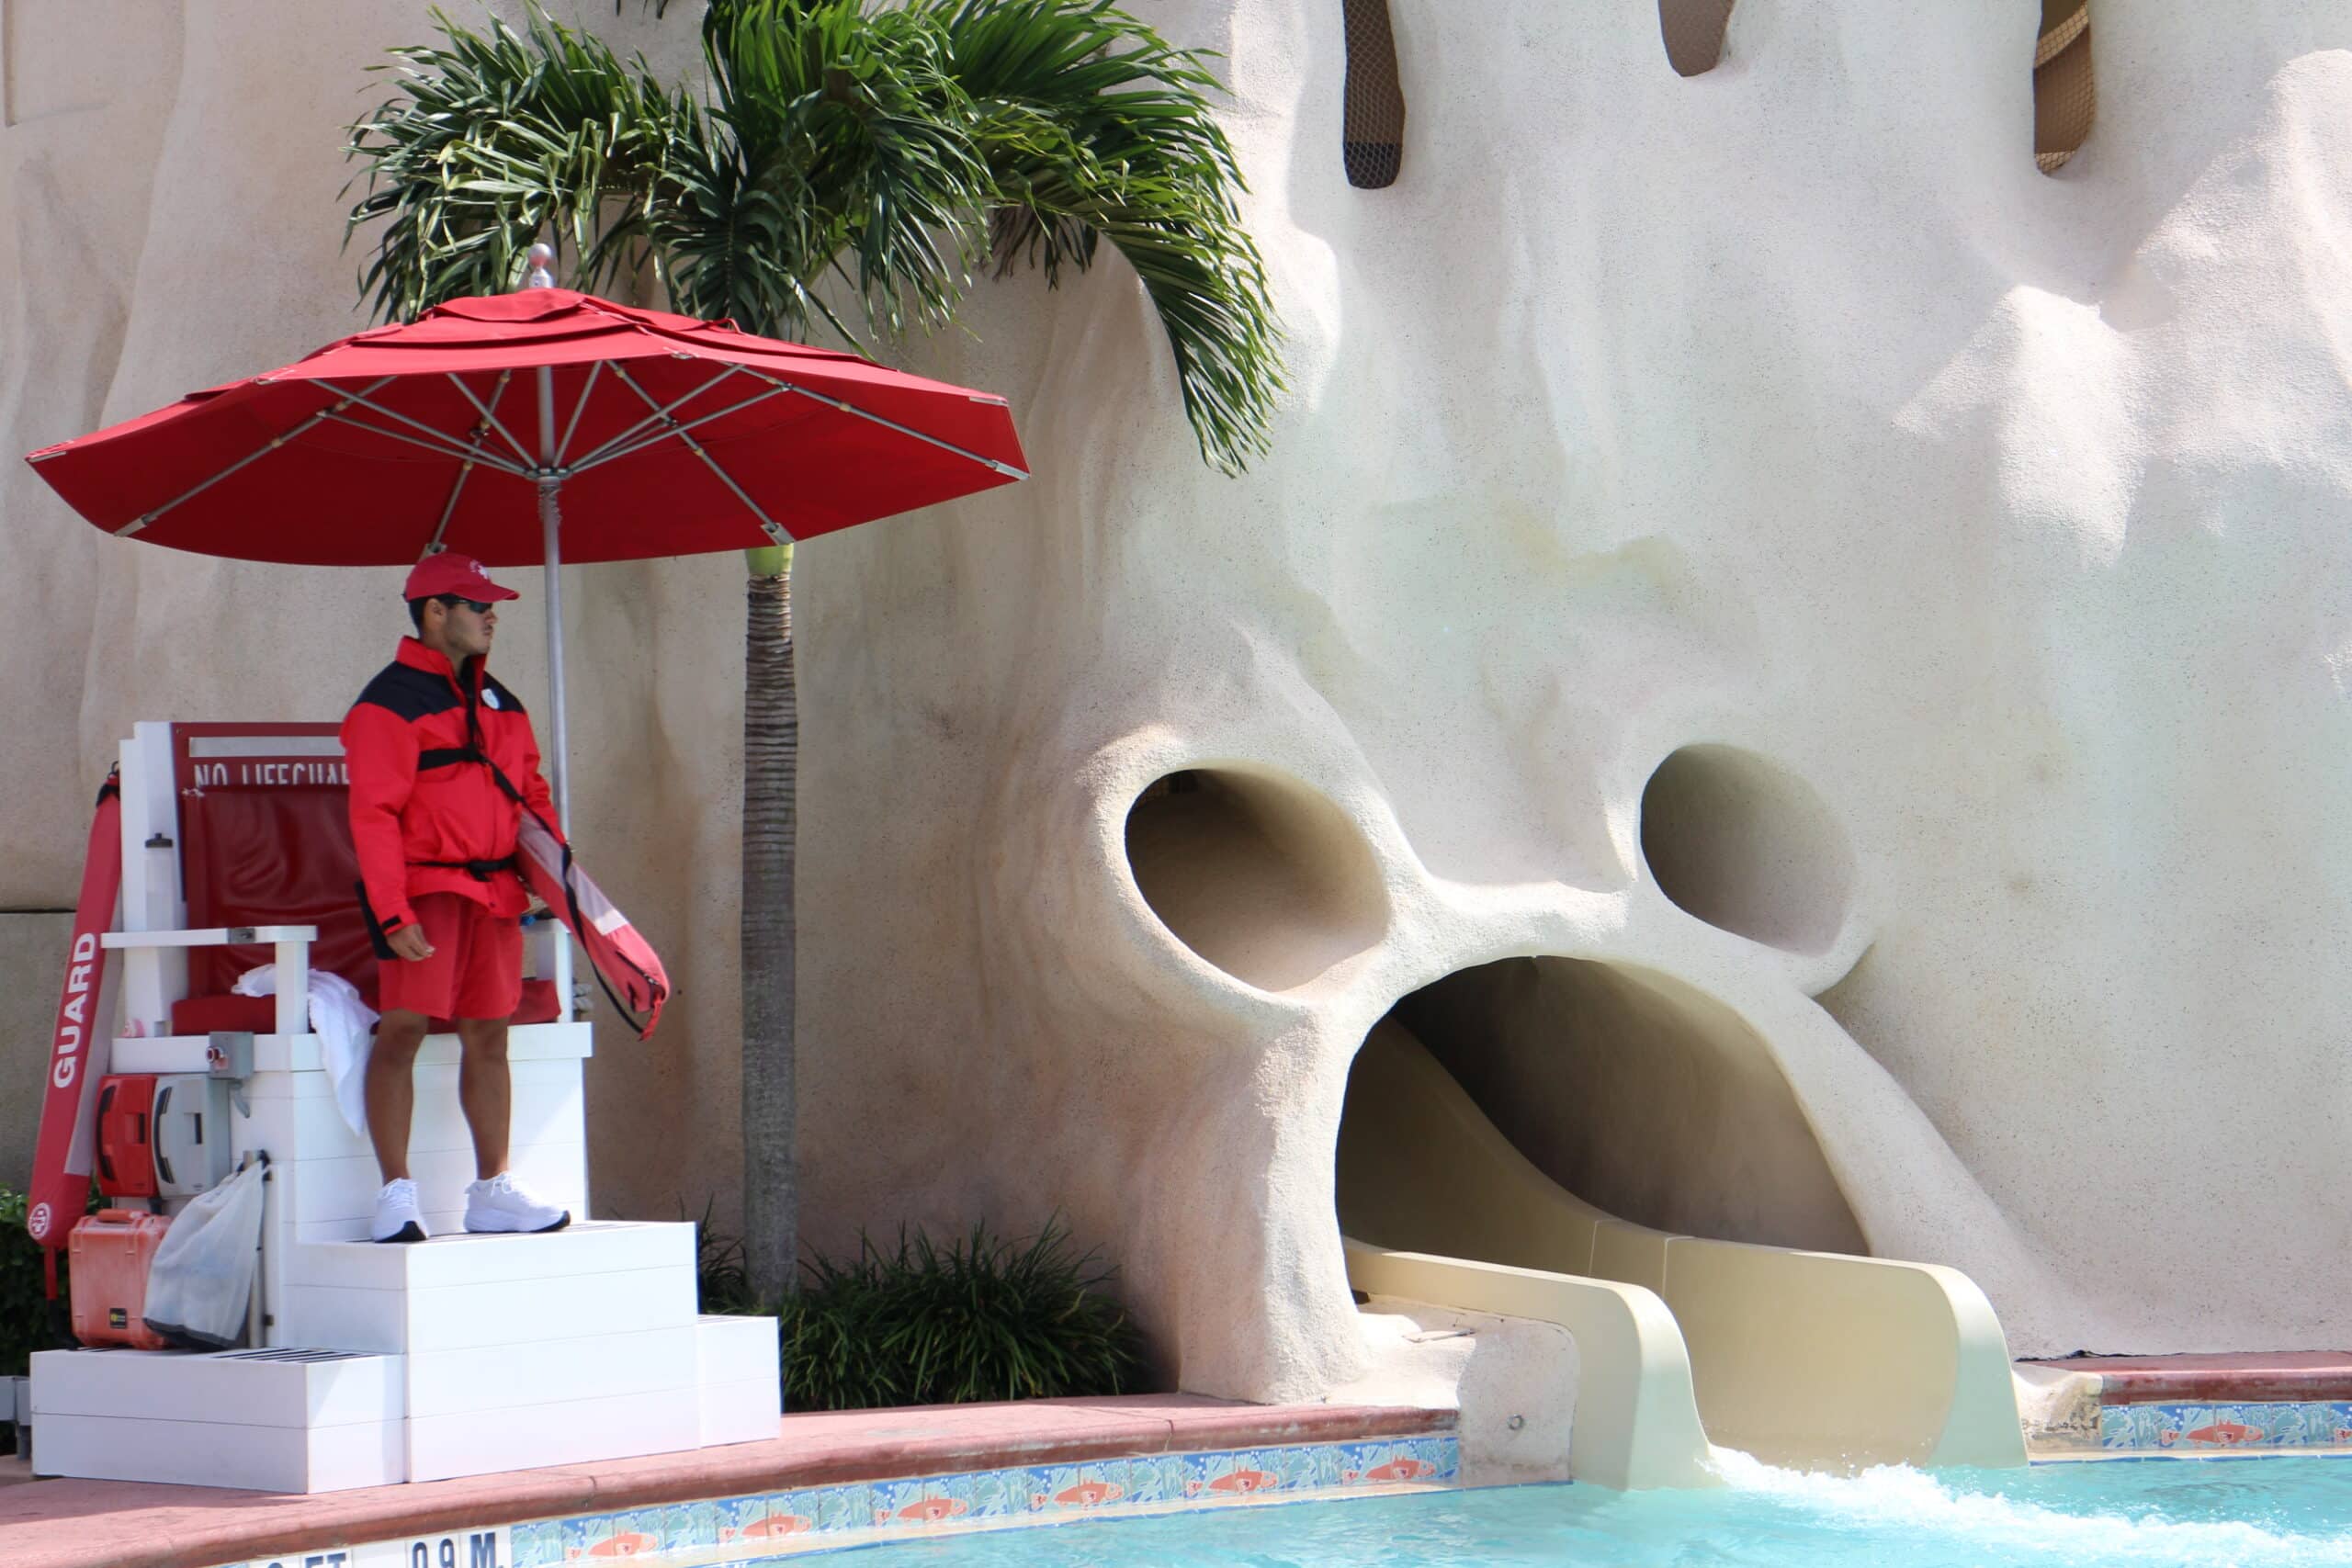 A sandcastle pool at Old Key West that has a Mickey mouse shaped pool slide exit into the pool. A life guard stands to the left in red attire.